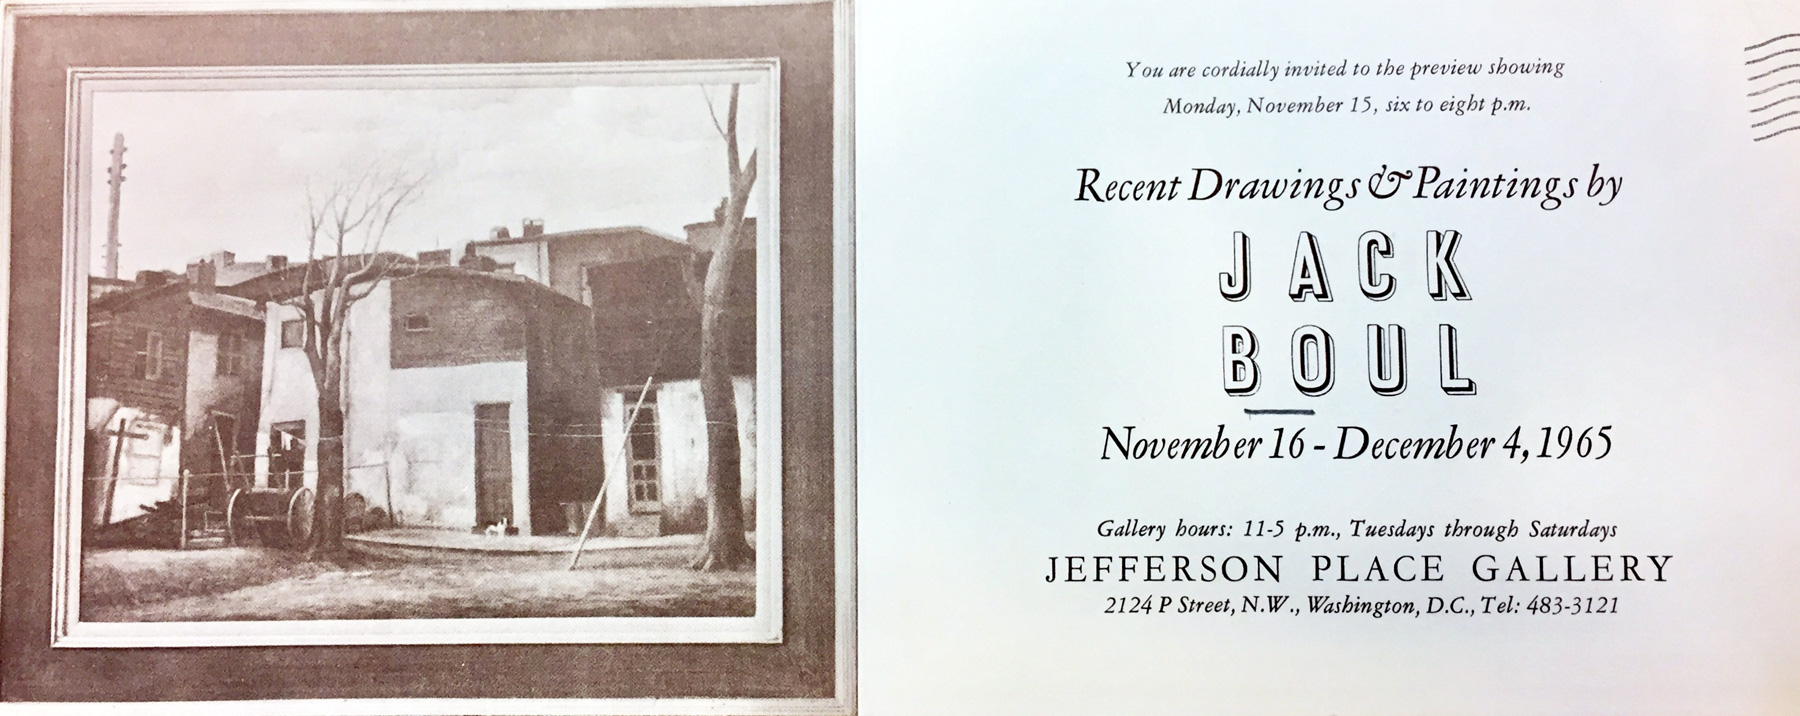 Announcement card for Jack Boul at Jefferson Place Gallery, 1965